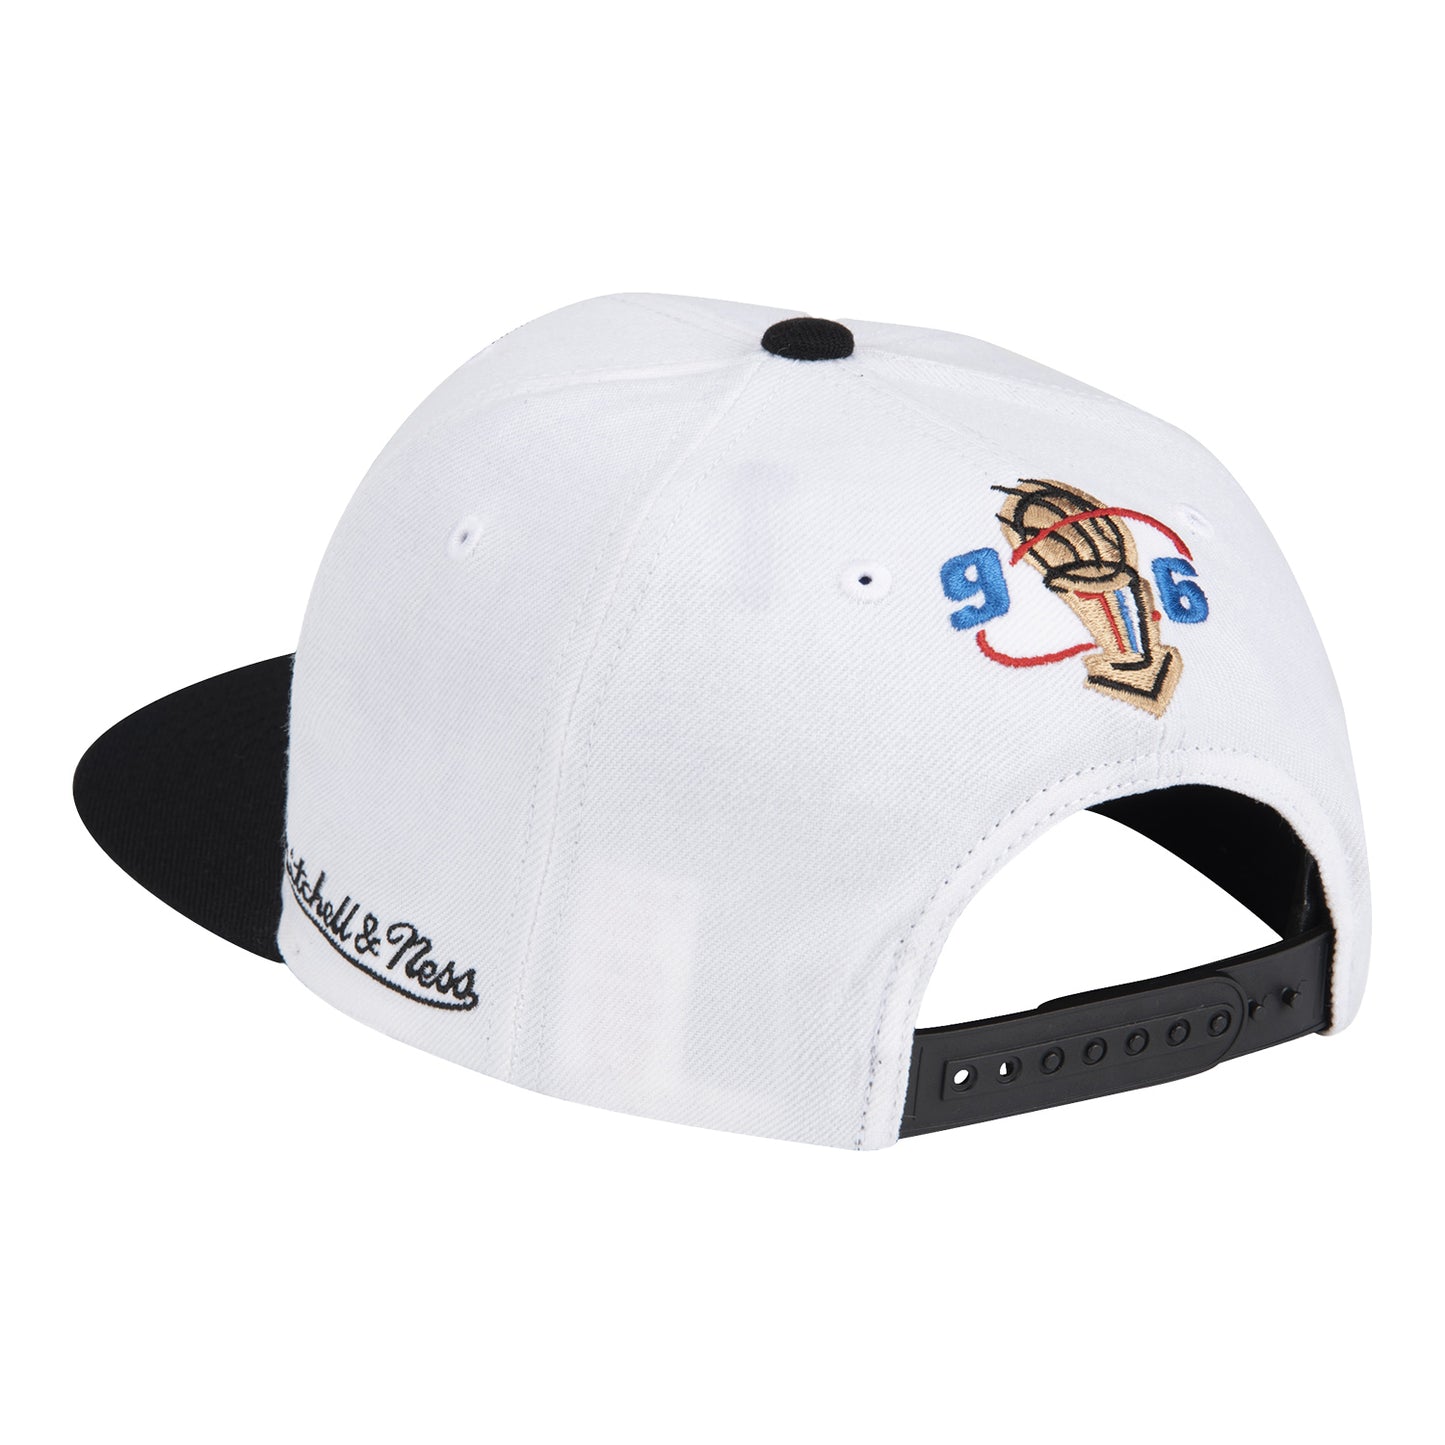 Chicago Bulls '96 Champs M&N Snapback in white - back view